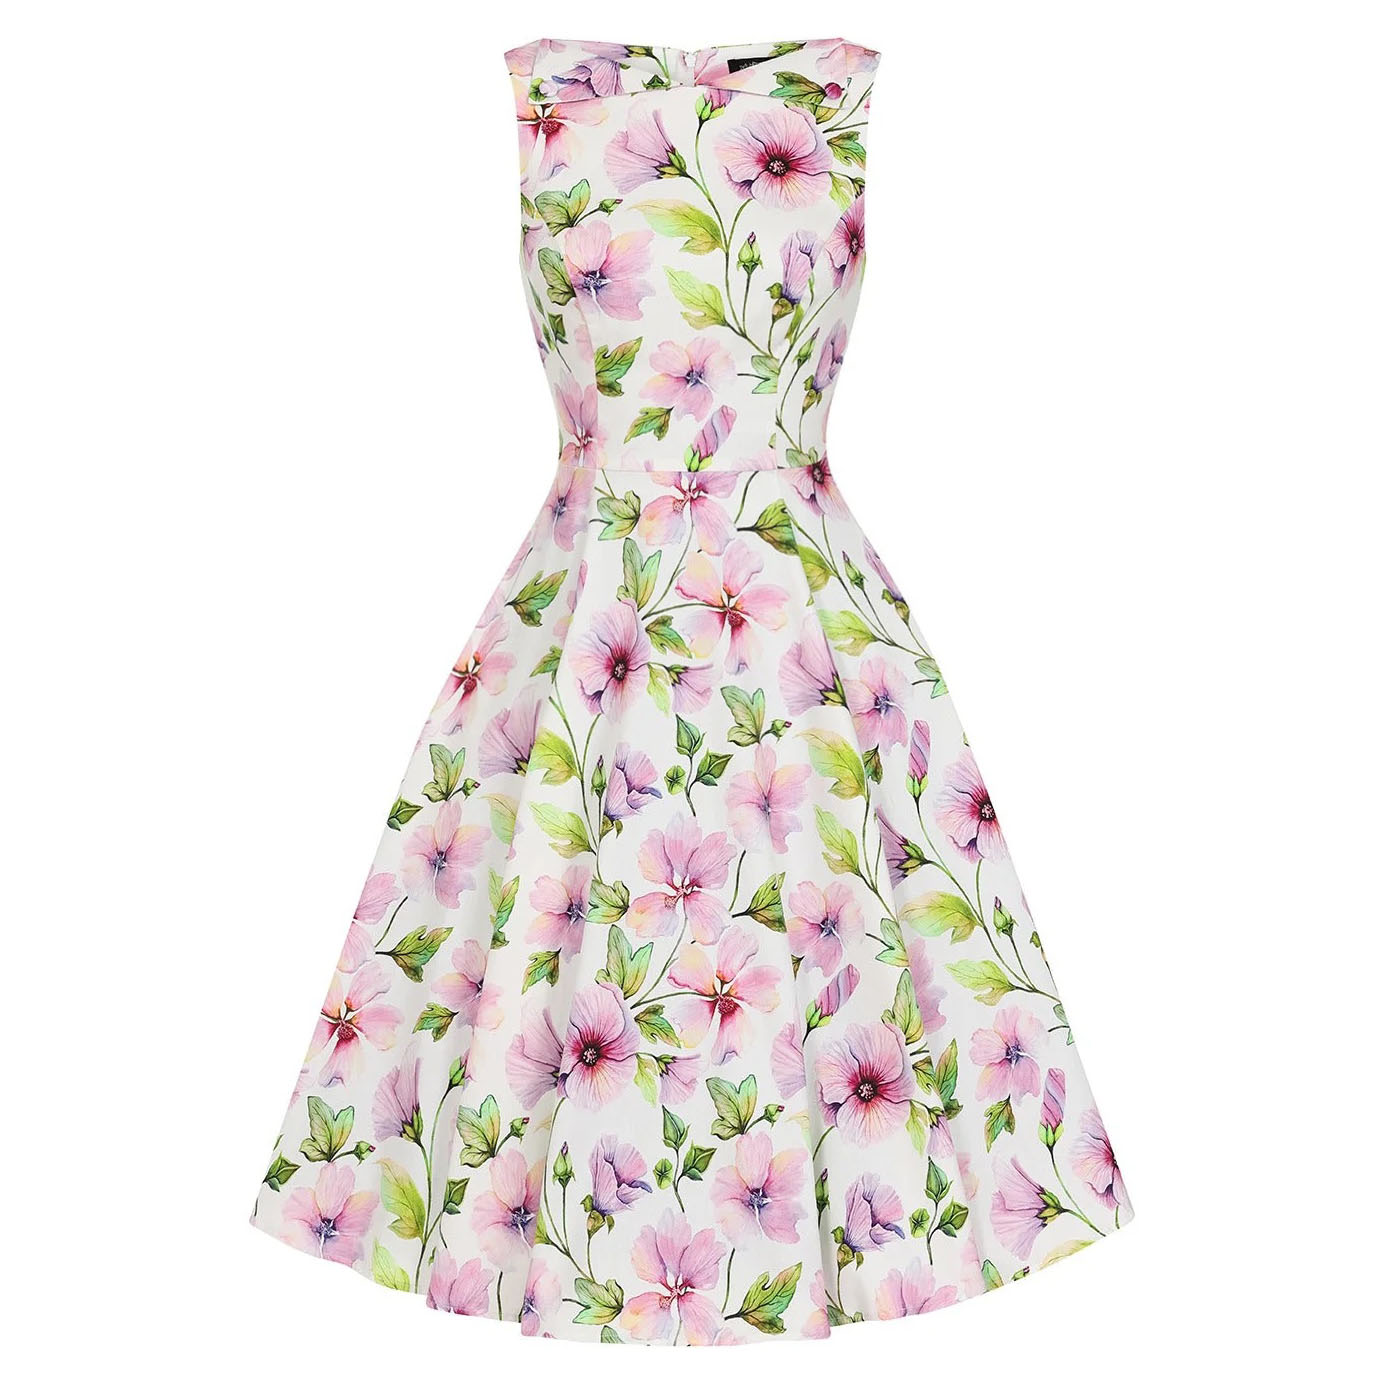 White & Spring Floral Print Audrey Style 50s Swing Dress